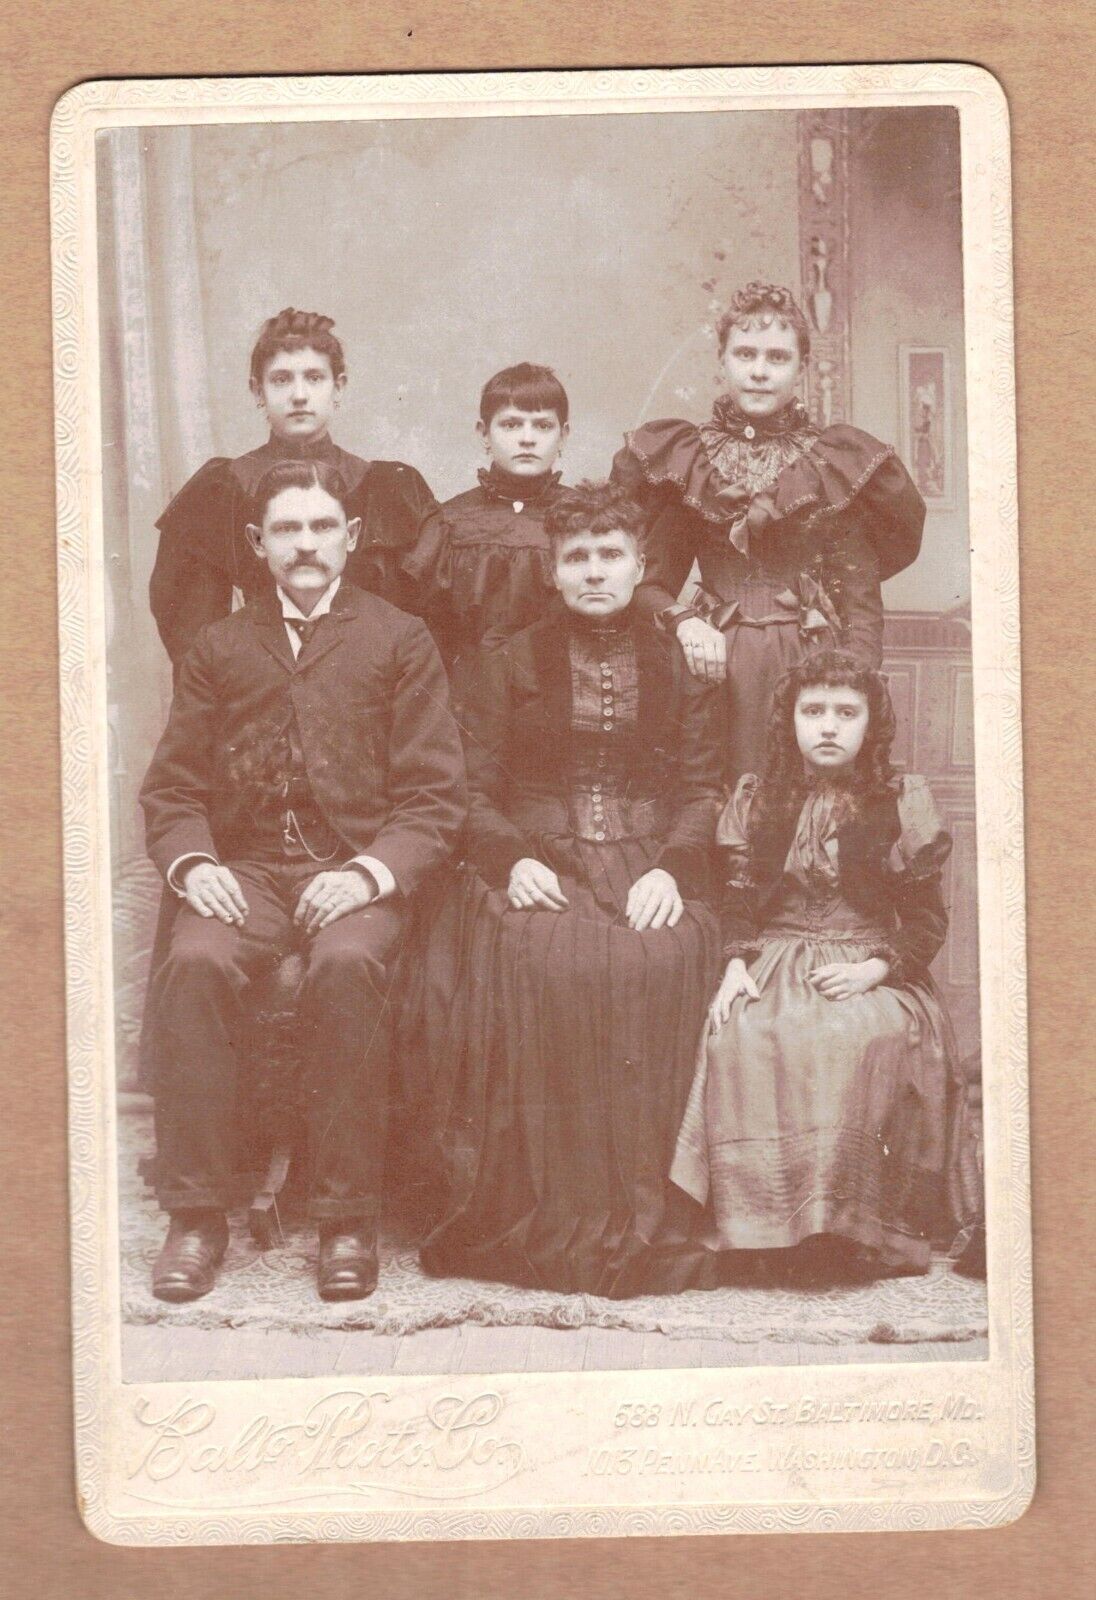 Antique Cabinet Card Photo of a Family, Baltimore Photo Co.